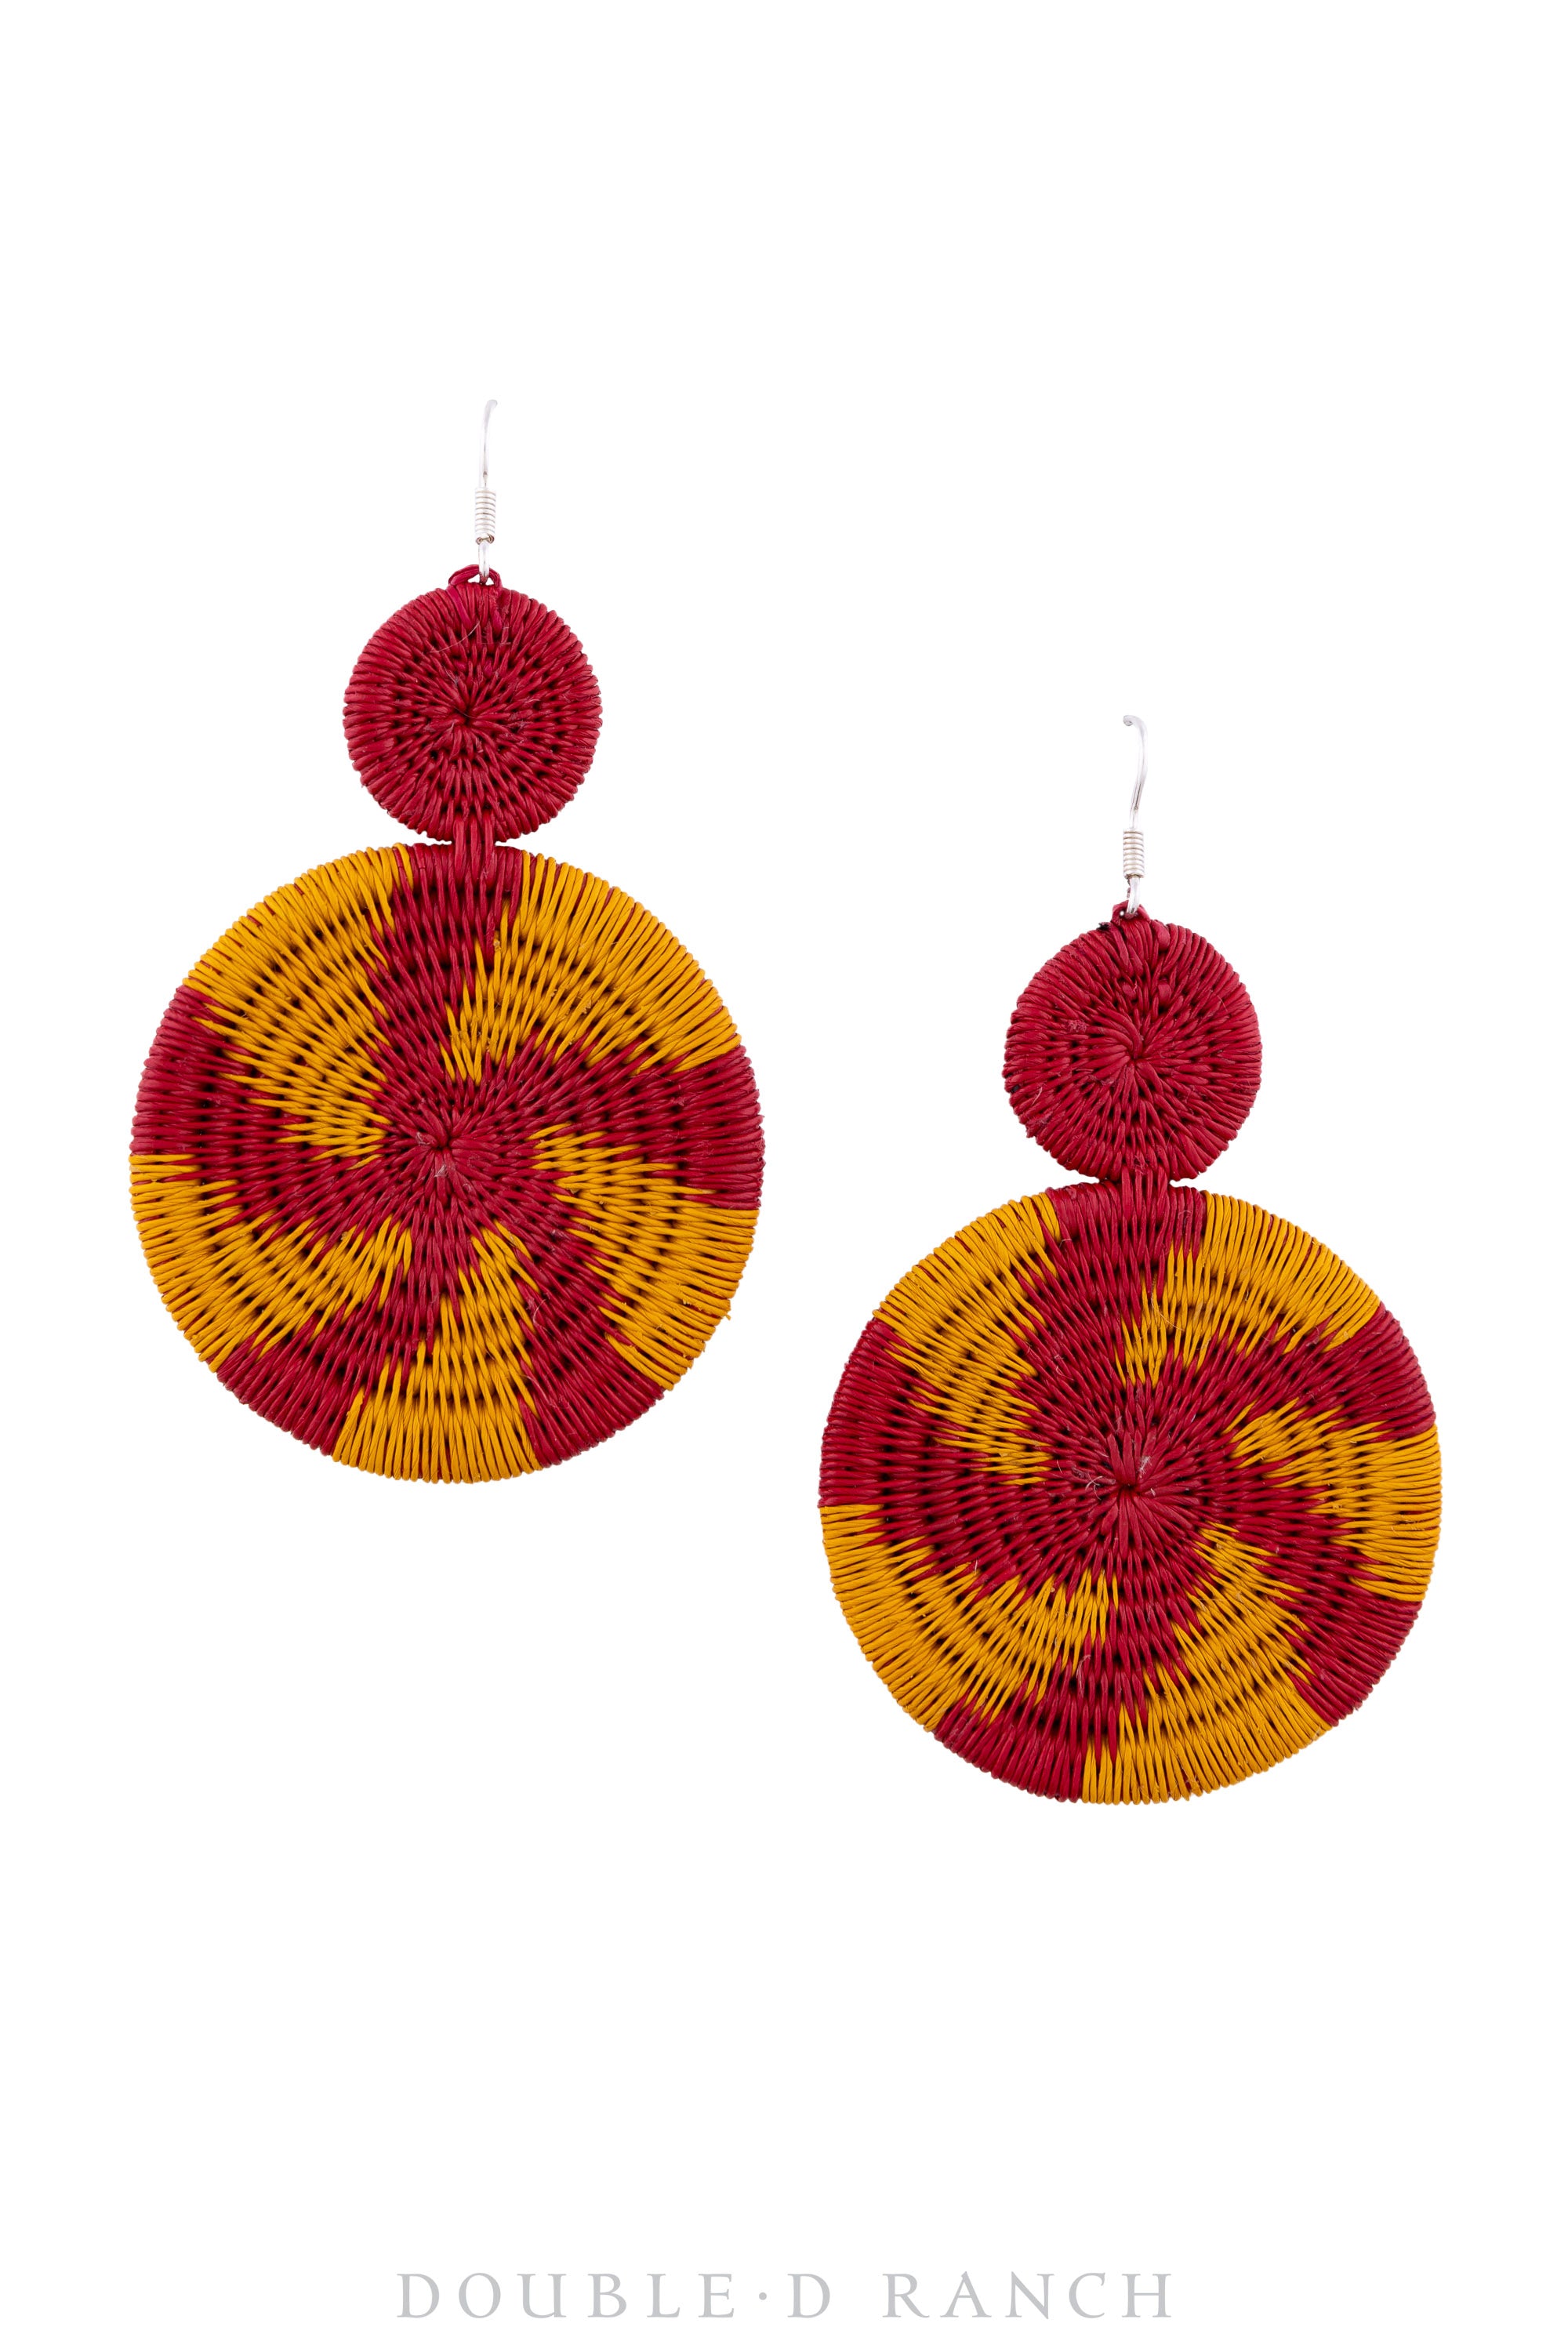 Earrings, Weave, Contemporary, 963A